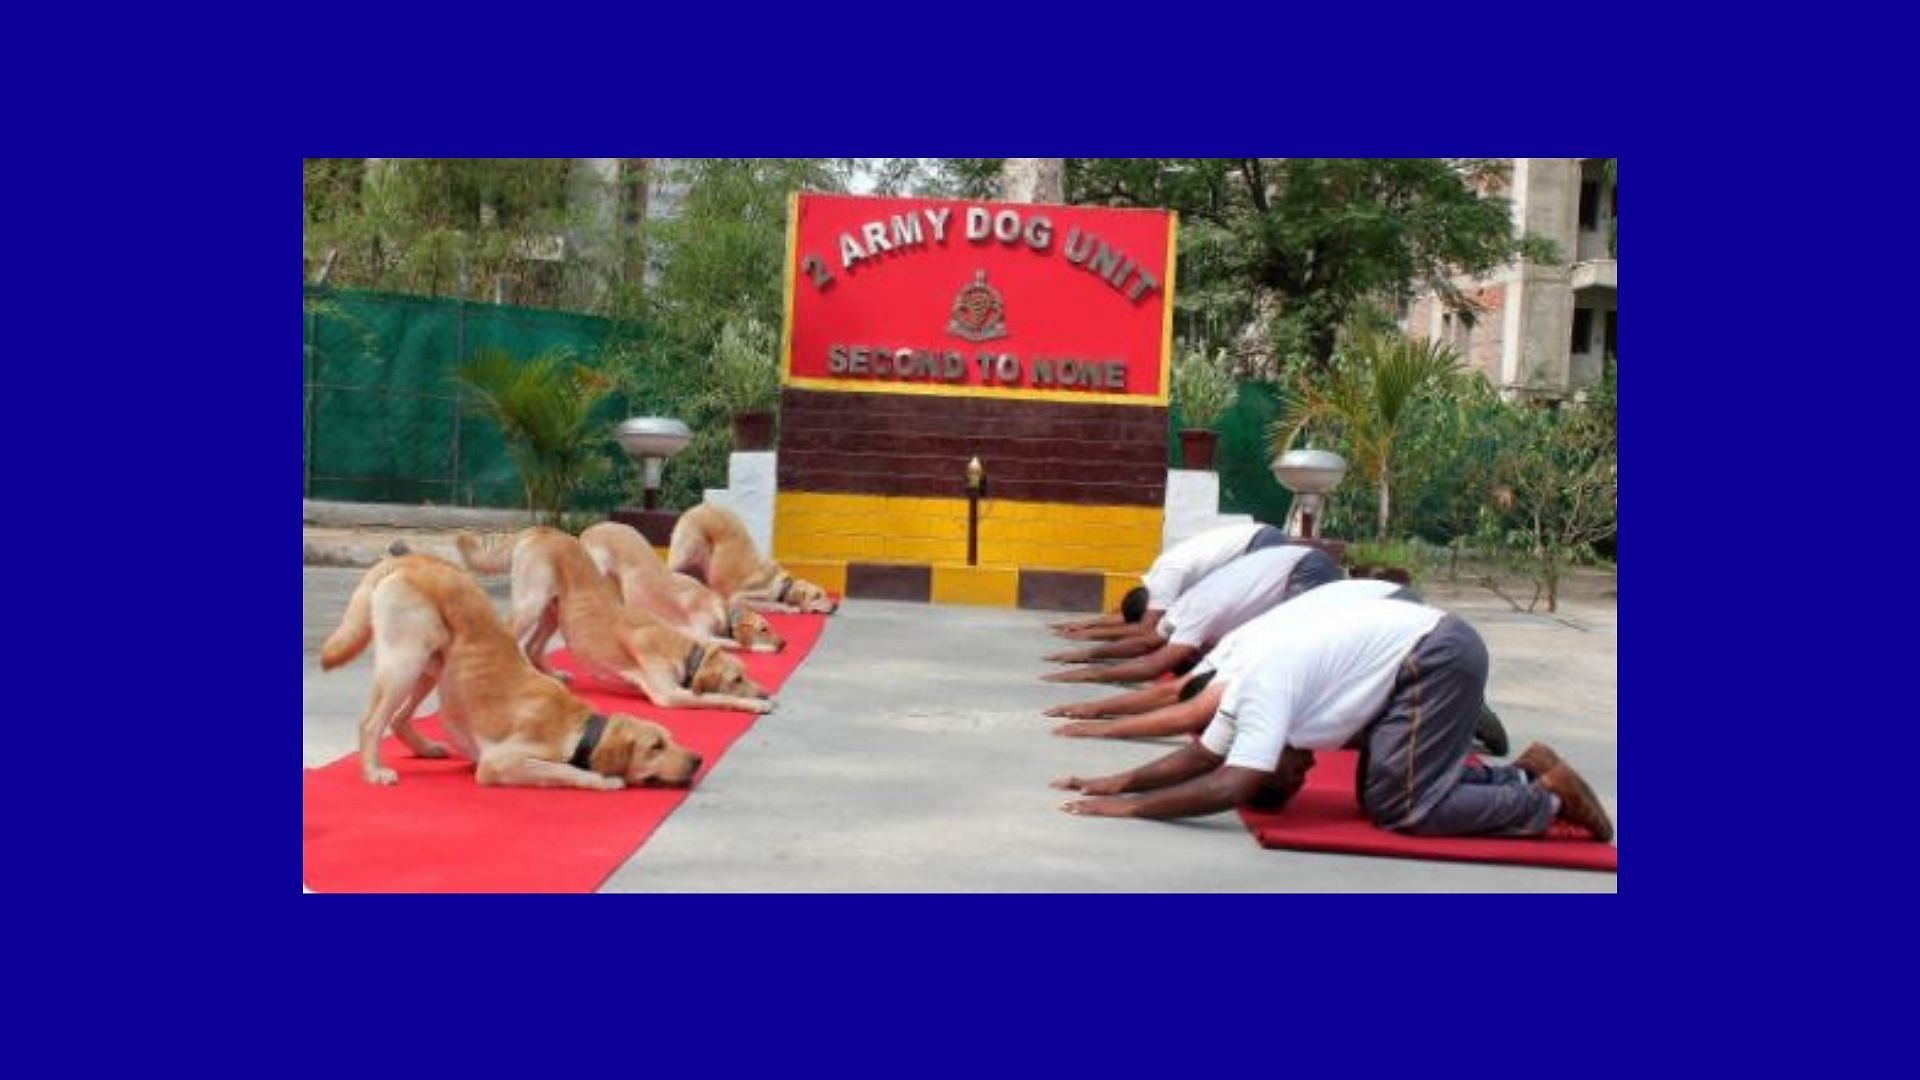 Even dogs participated in International Yoga Day celebrations!